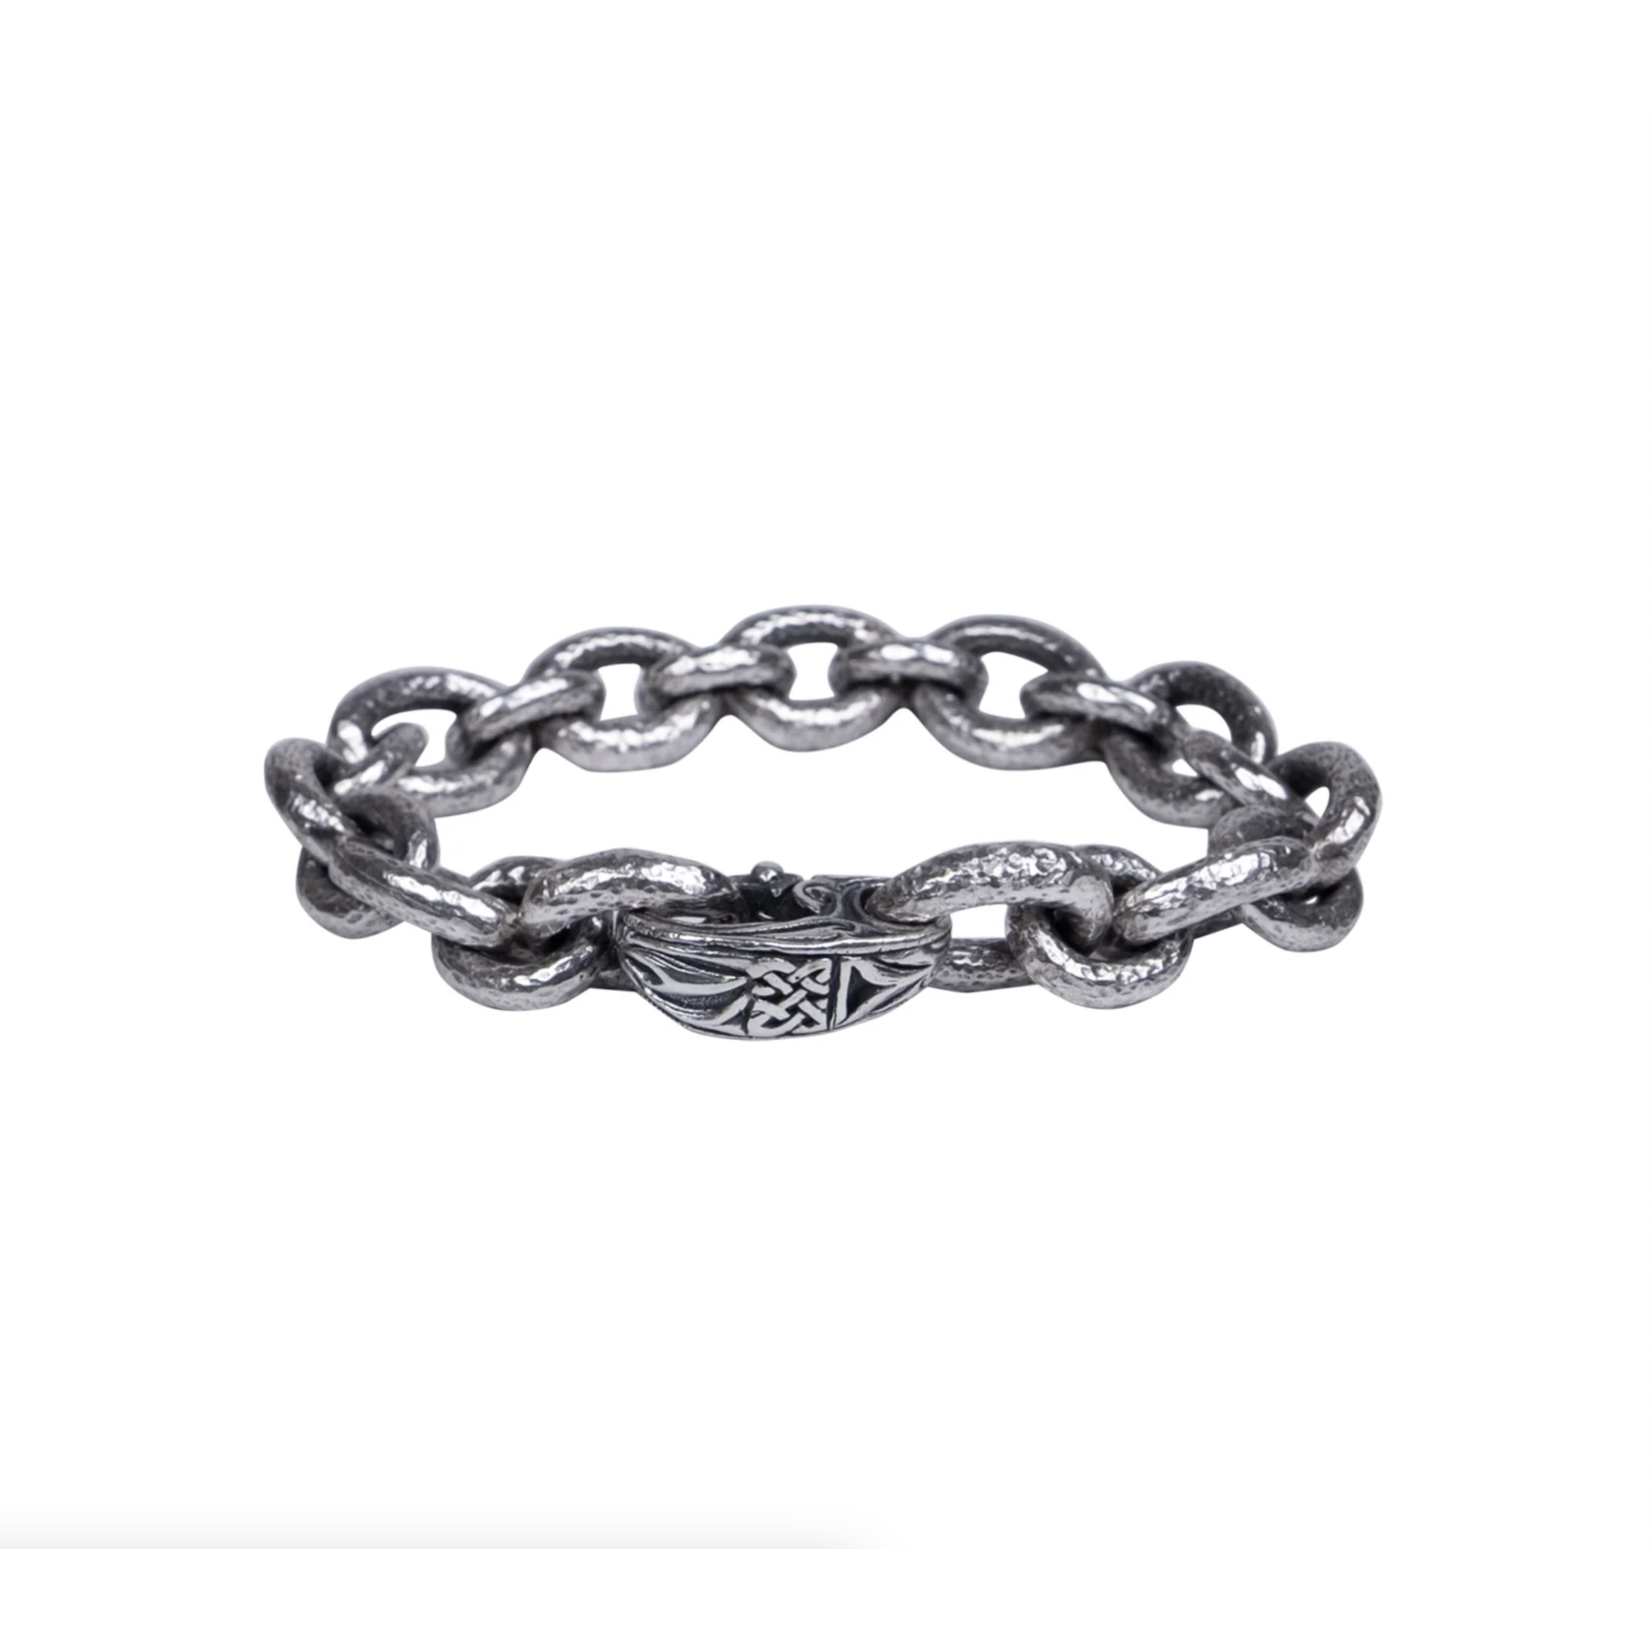 Keith Jack Heavy Hammered Oval and Small Link Bracelet - 9 inch